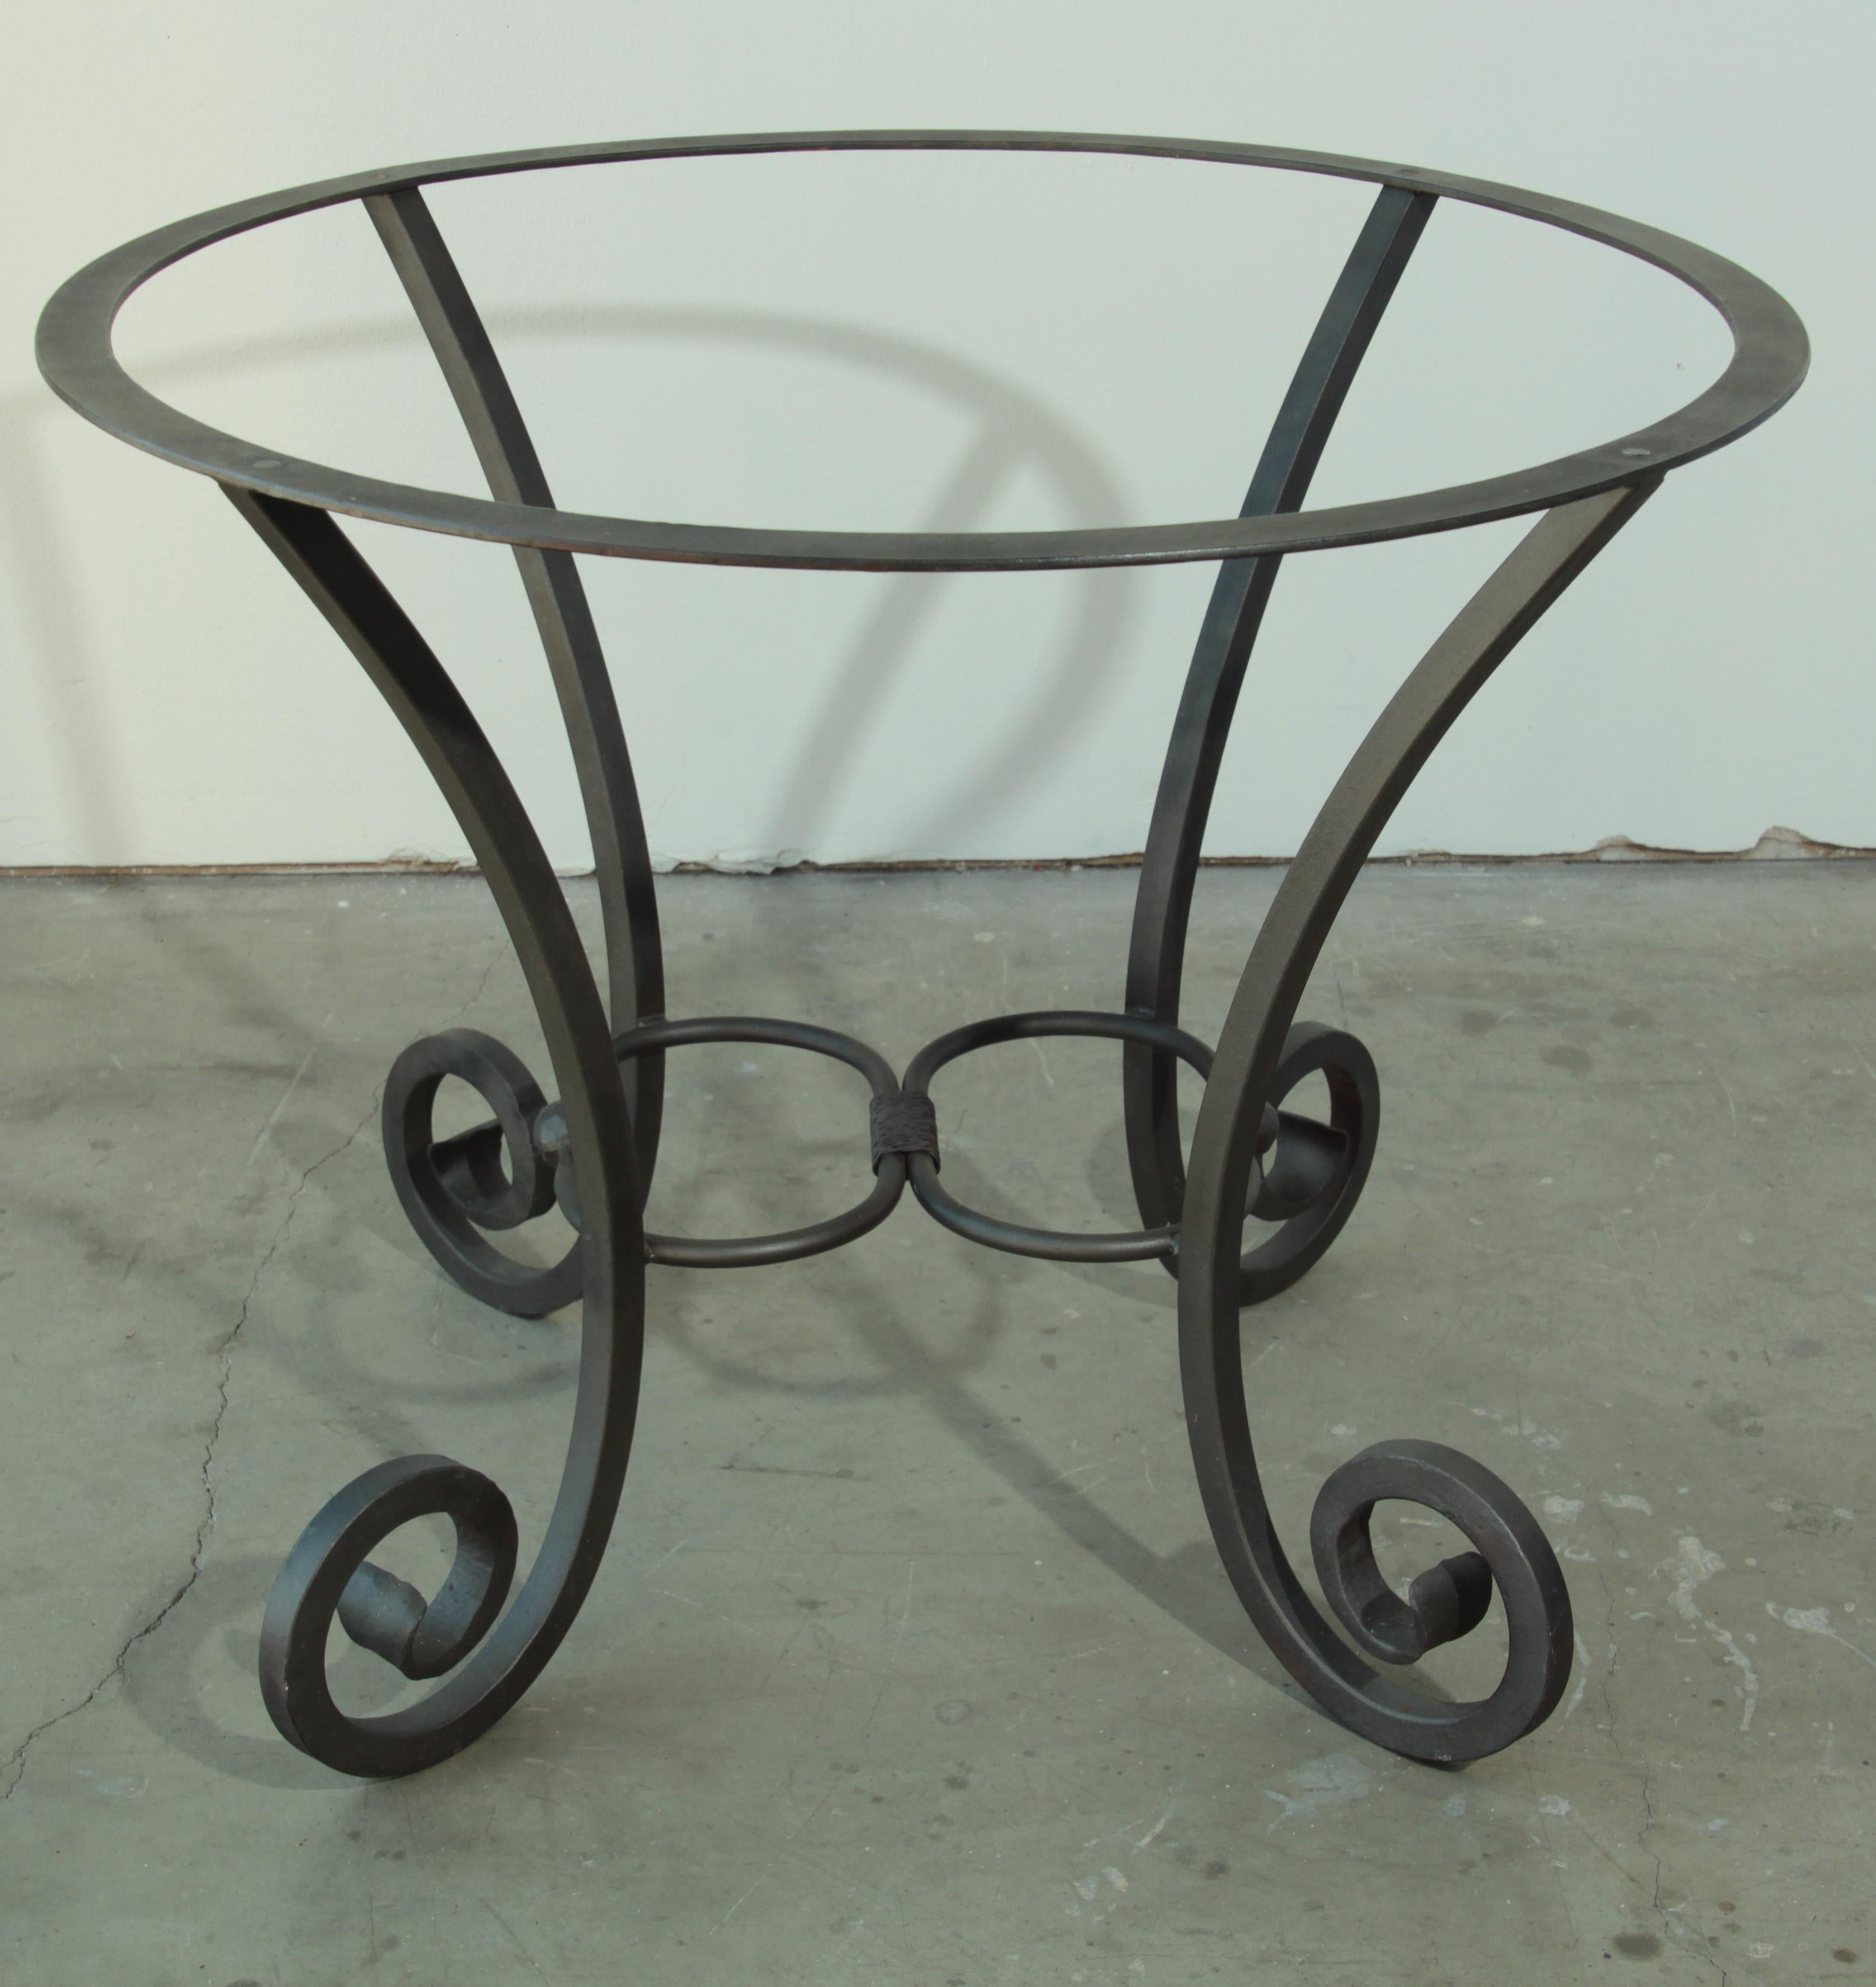 Hand-Crafted Wrought Iron Table with Glass Top